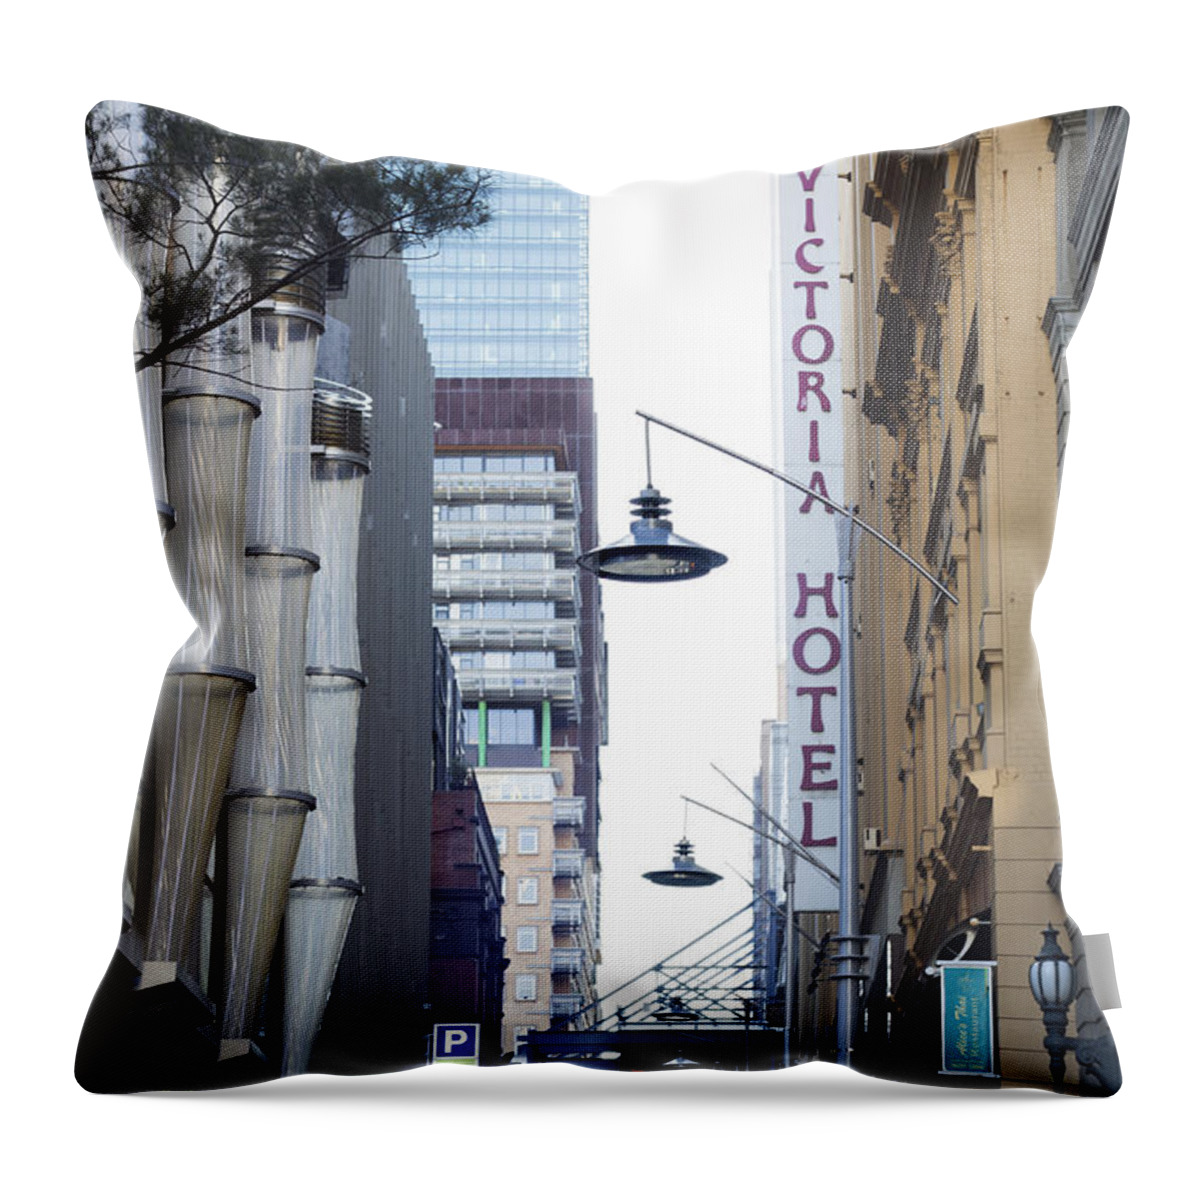 Melbourne Throw Pillow featuring the photograph Marvellous Melbourne 5 by Linda Lees